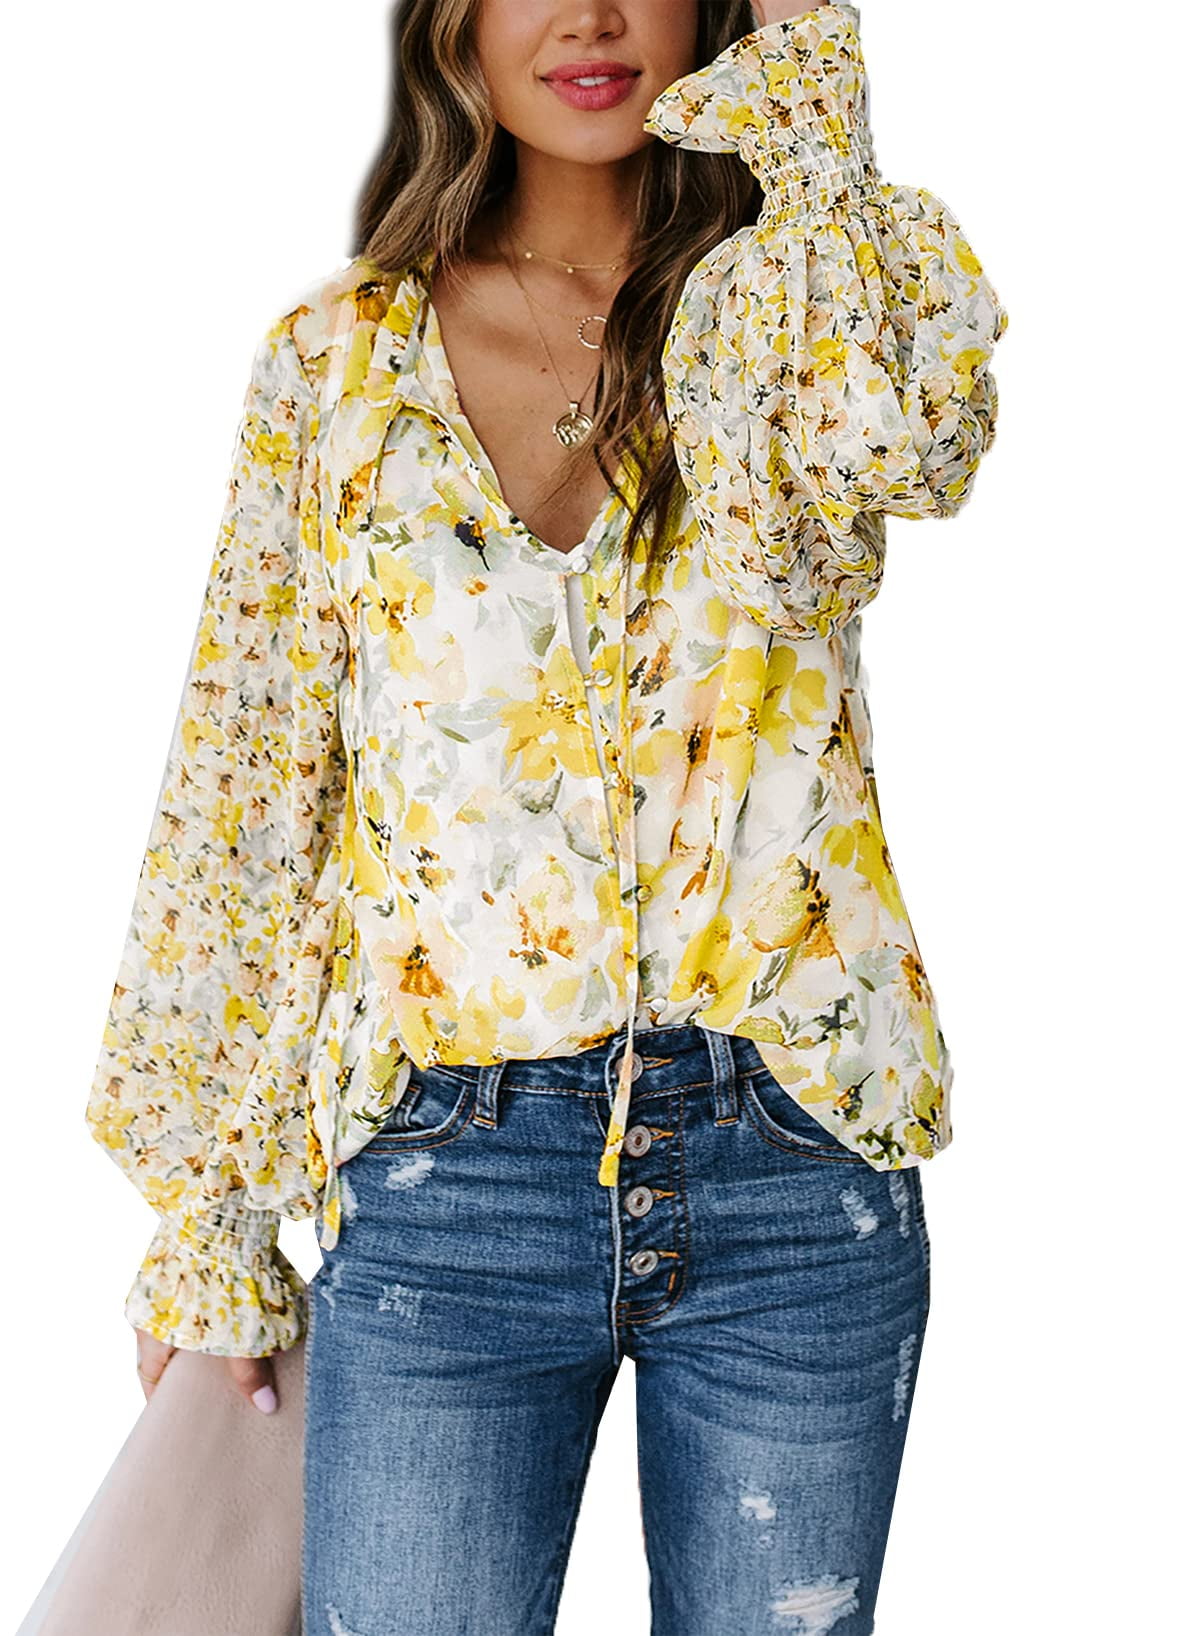 EVALESS Boho Shirts for Women Floral Print V Neck Blouses Casual Puff ...